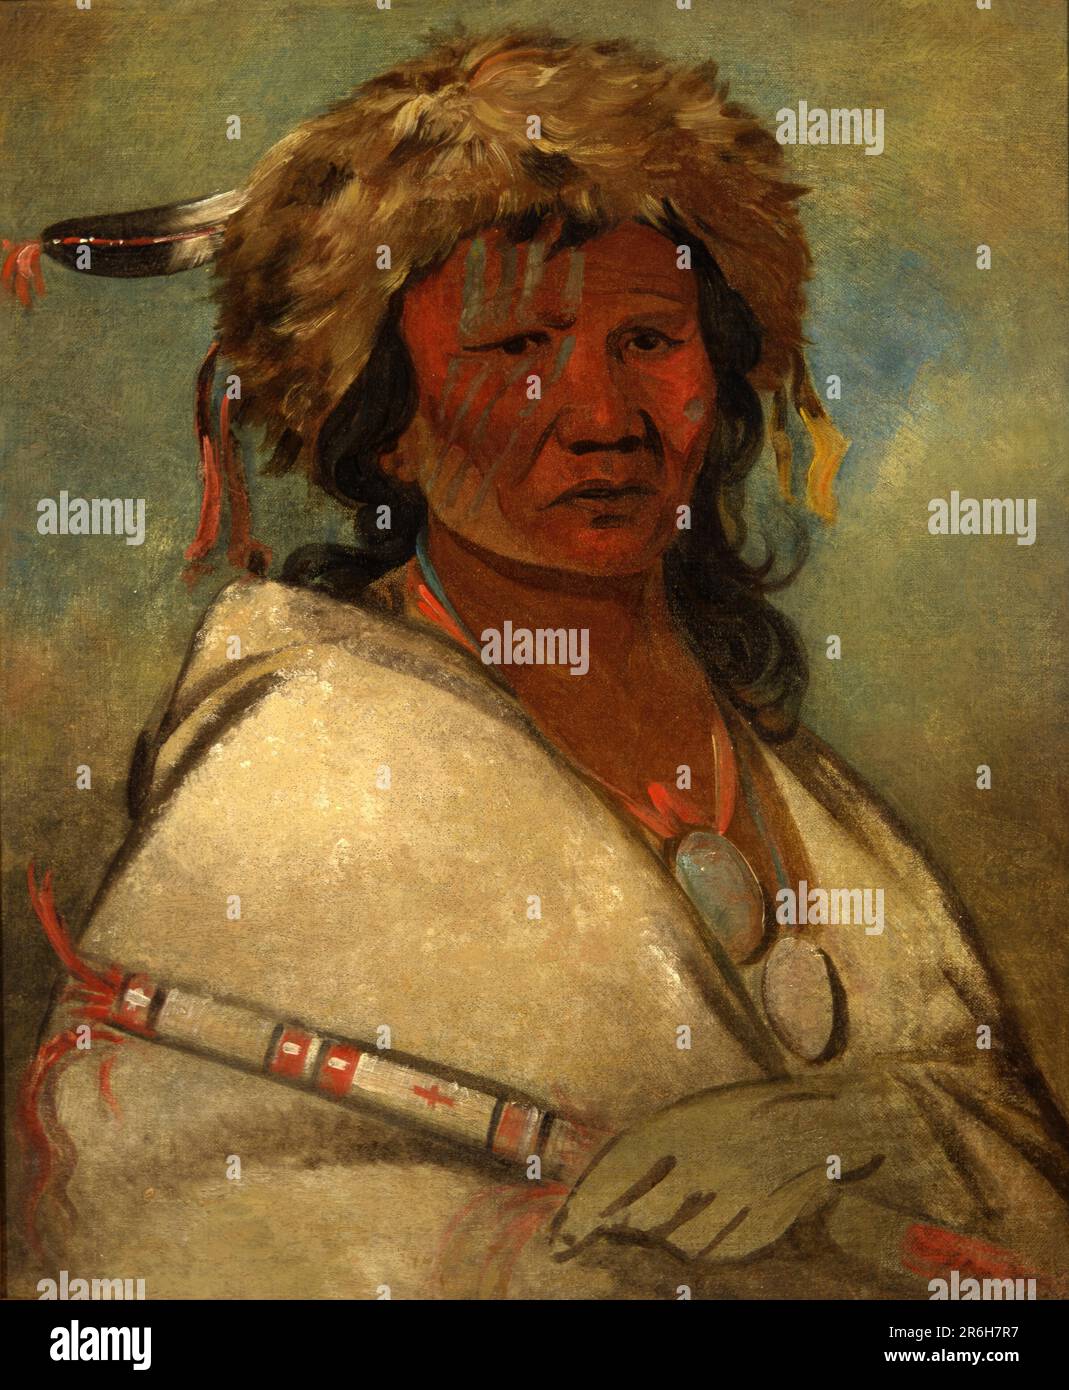 Great Hero, a chief. Date: 1845. oil on canvas. Museum: Smithsonian American Art Museum. Stock Photo